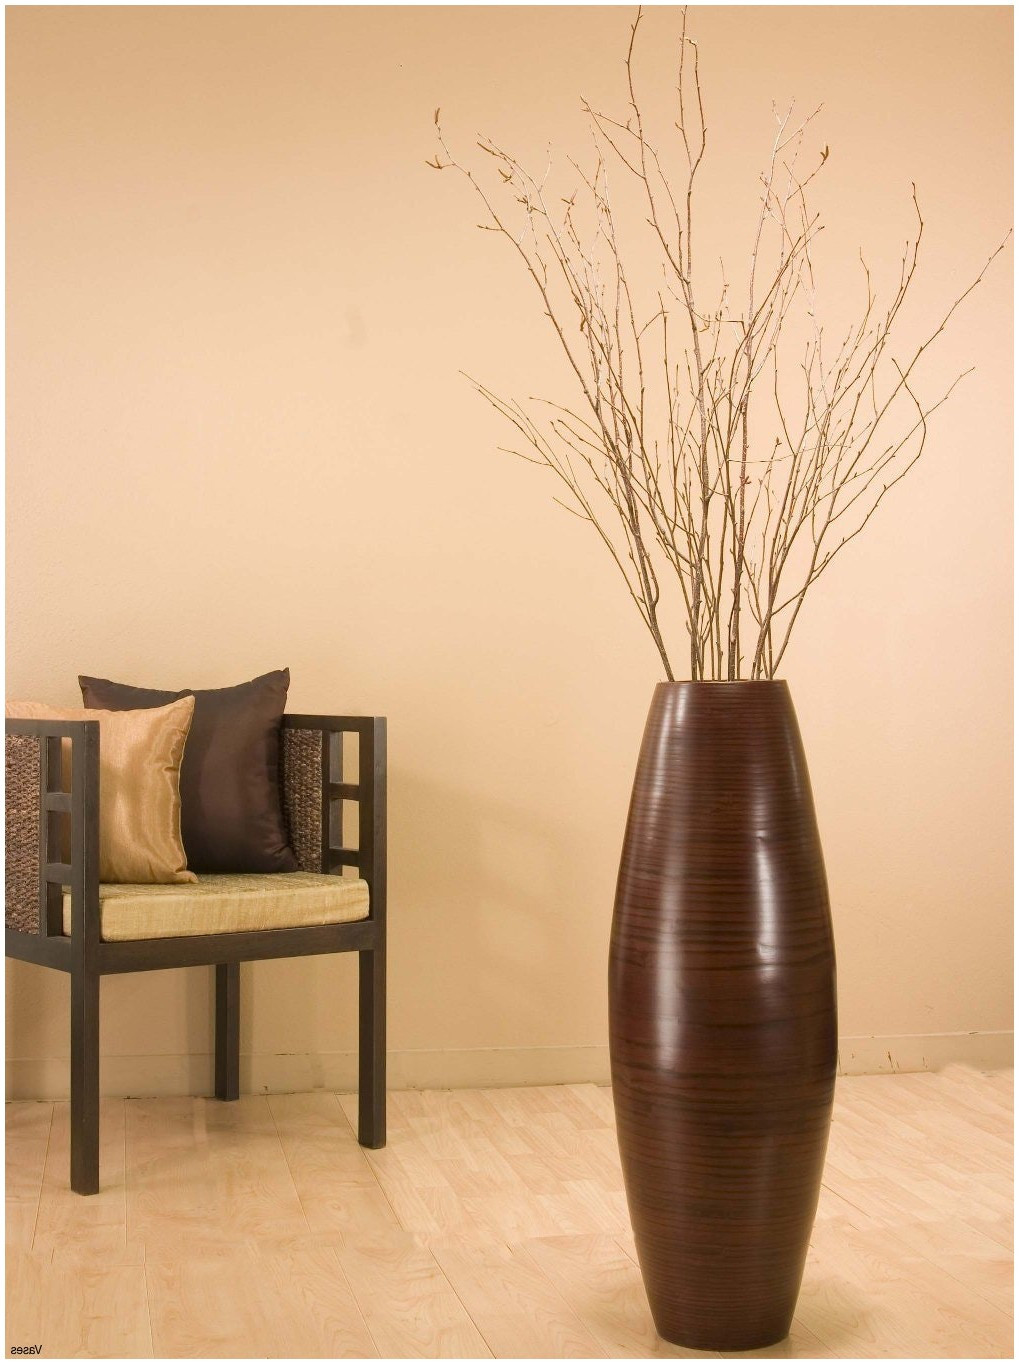 27 Wonderful Tall Vase with Sticks 2024 free download tall vase with sticks of 21 beau decorative vases anciendemutu org in 712x0qv9hql sl1364 h vases tall green floor decorative standing with branchesi 0d